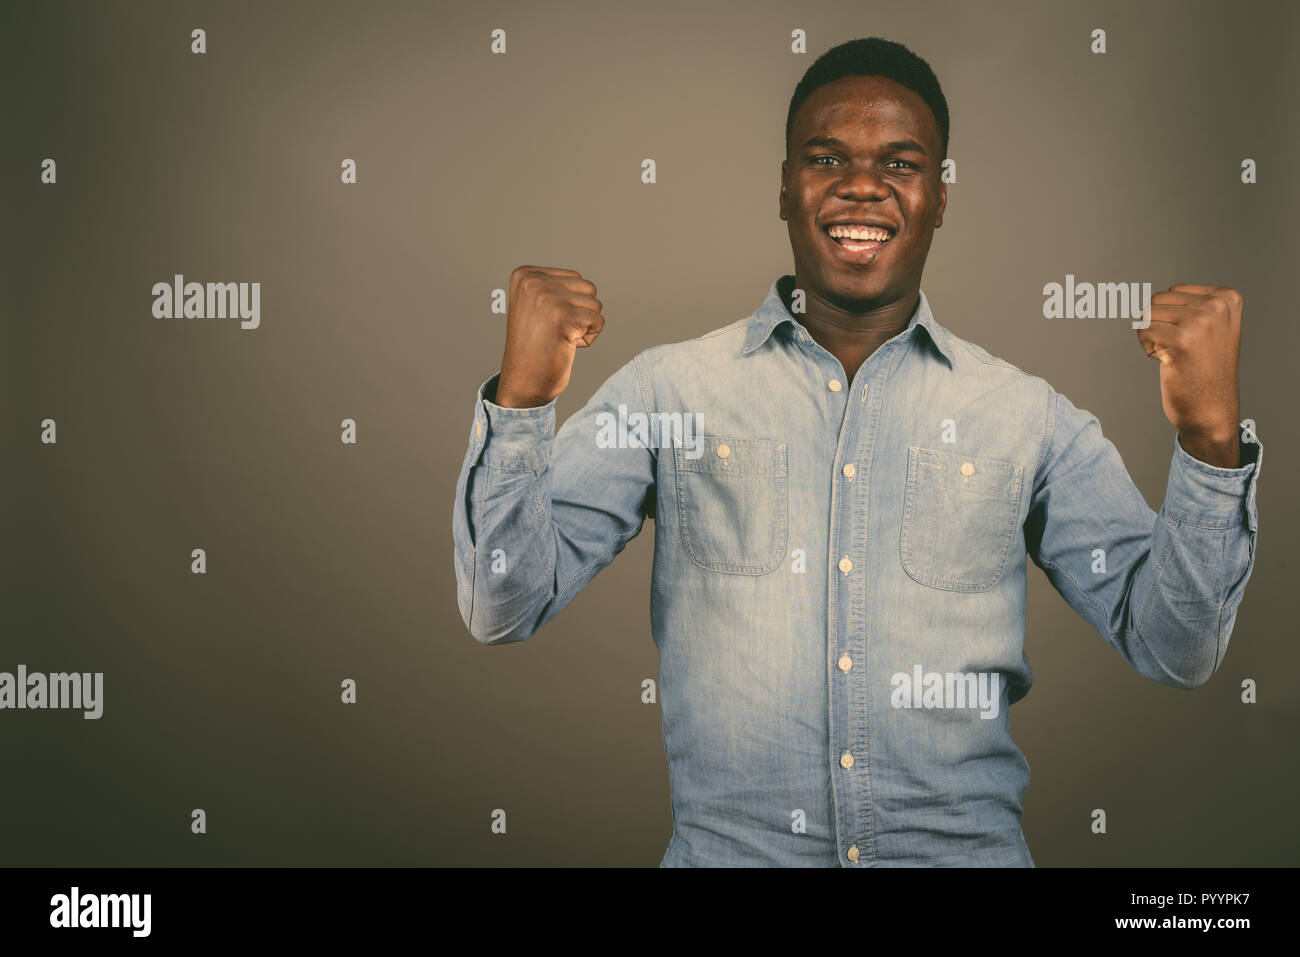 Young happy African man smiling with both arms raised against gr Stock Photo